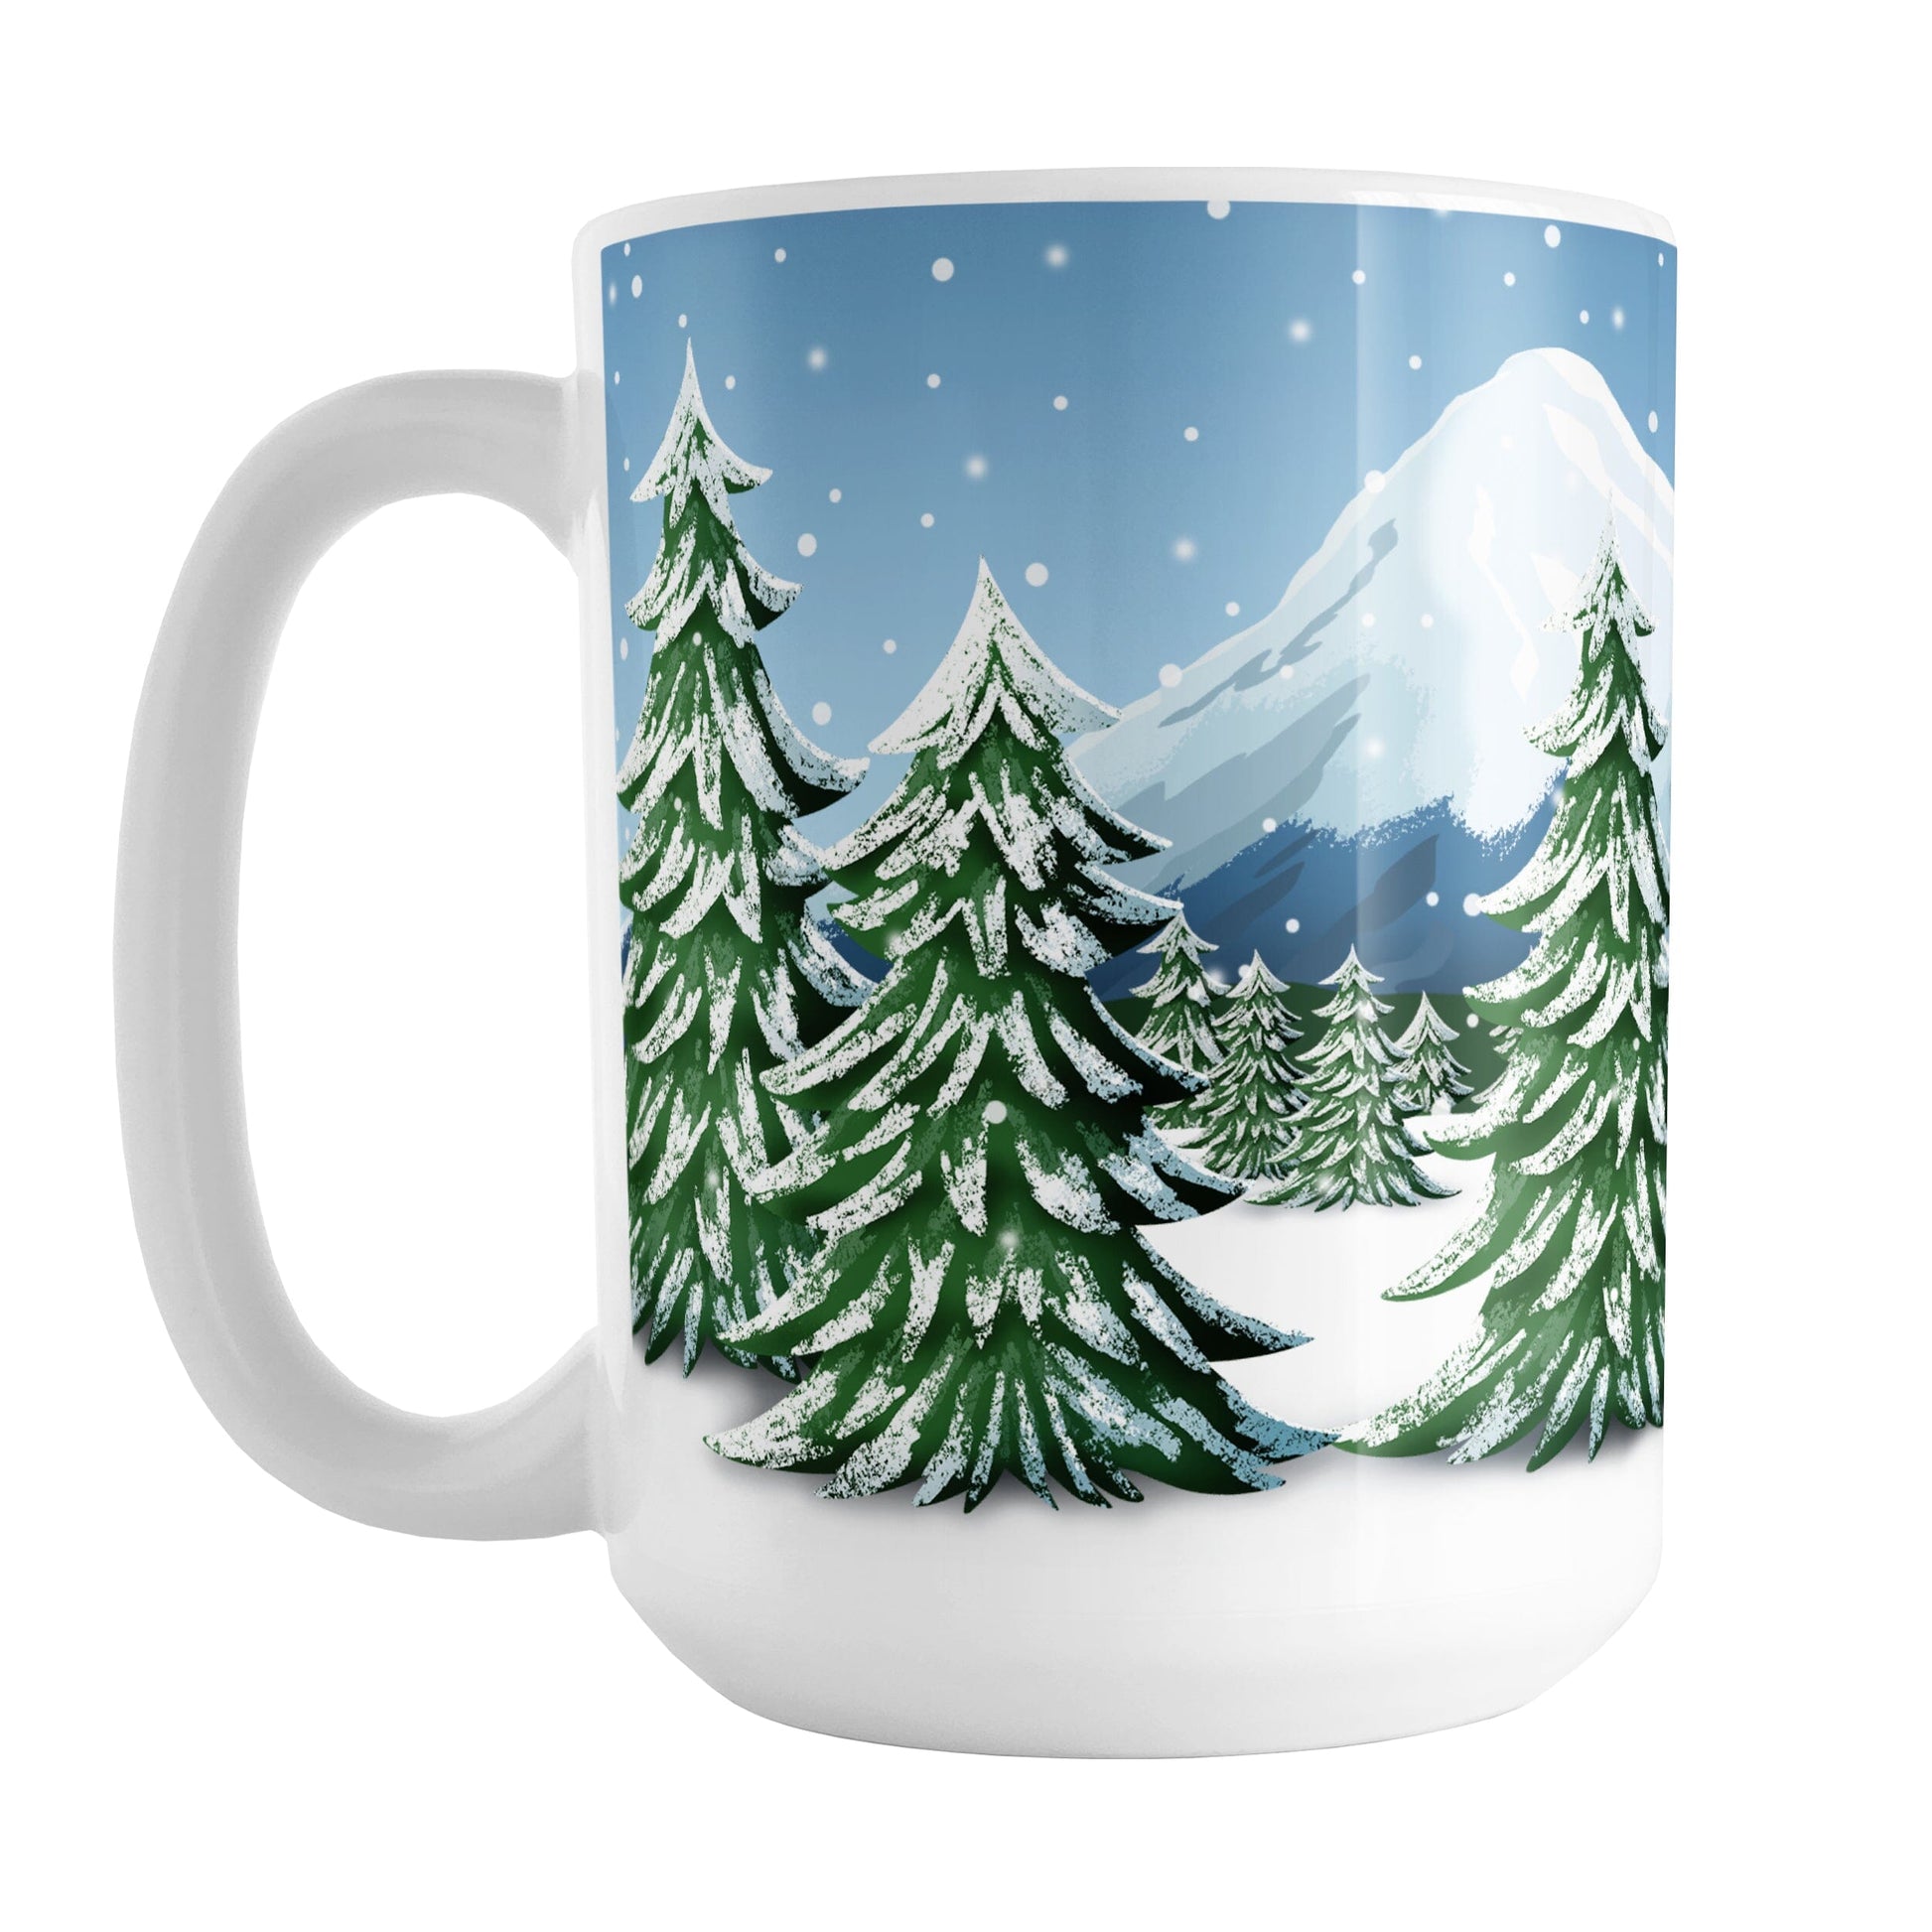 Outdoors Winter Trees Scene Mug (15oz) at Amy's Coffee Mugs. A ceramic coffee mug designed with a beautiful winter scene illustrated with snow-covered pine trees, snowy mountains, and a snowing winter sky. 